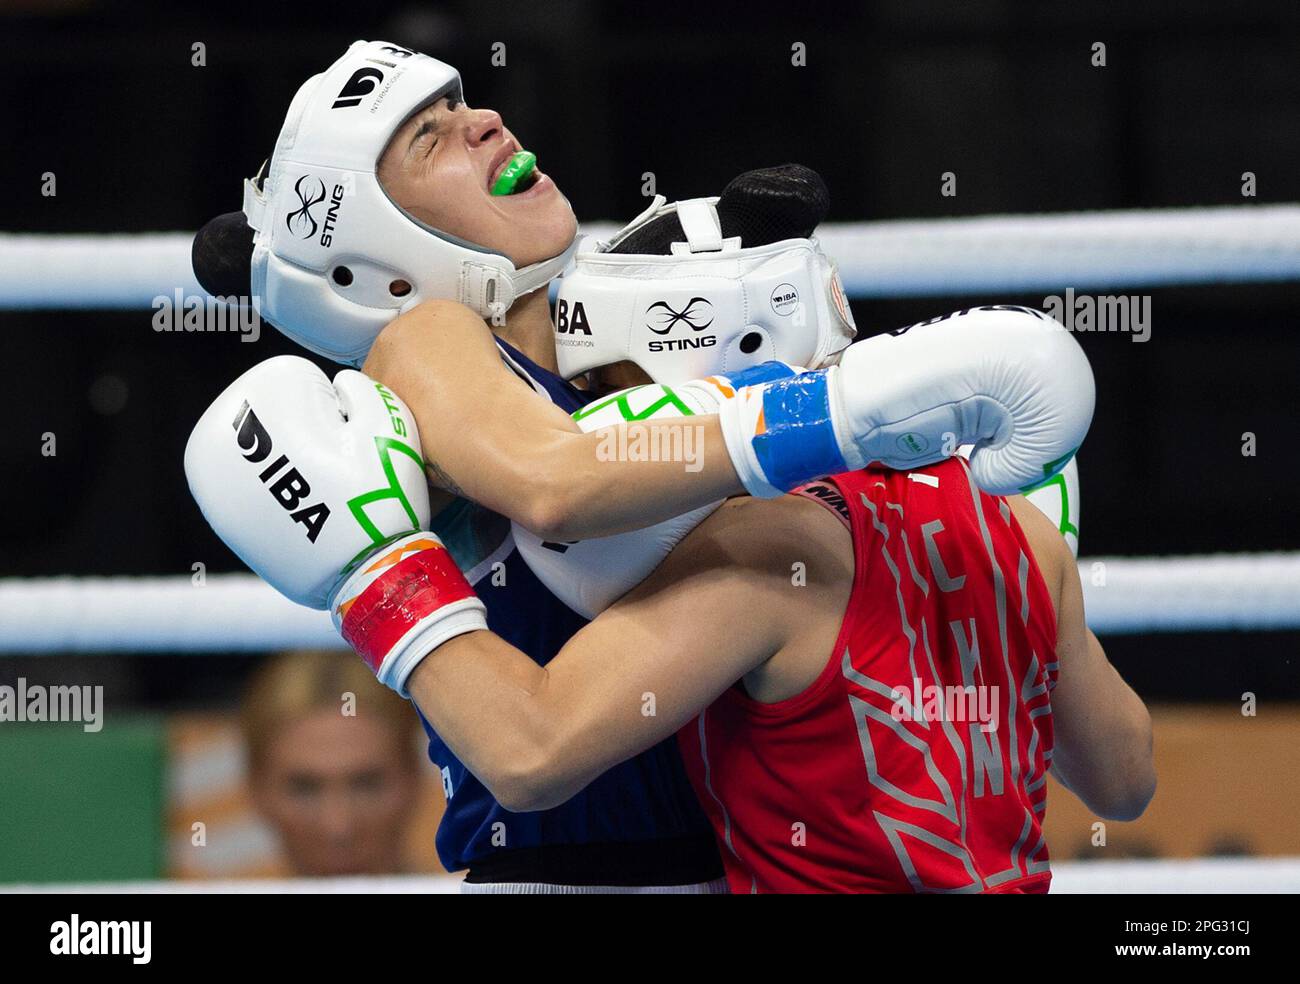 New Delhi, India. 20th Mar, 2023. Maria Gonzalez Caceres of Spain (L) competes with Wu Yu of China during the elite 50-52kg fly round of 16 match of the IBA World Women's Boxing Championships 2023 in New Delhi, India, March 20, 2023. Credit: Javed Dar/Xinhua/Alamy Live News Stock Photo